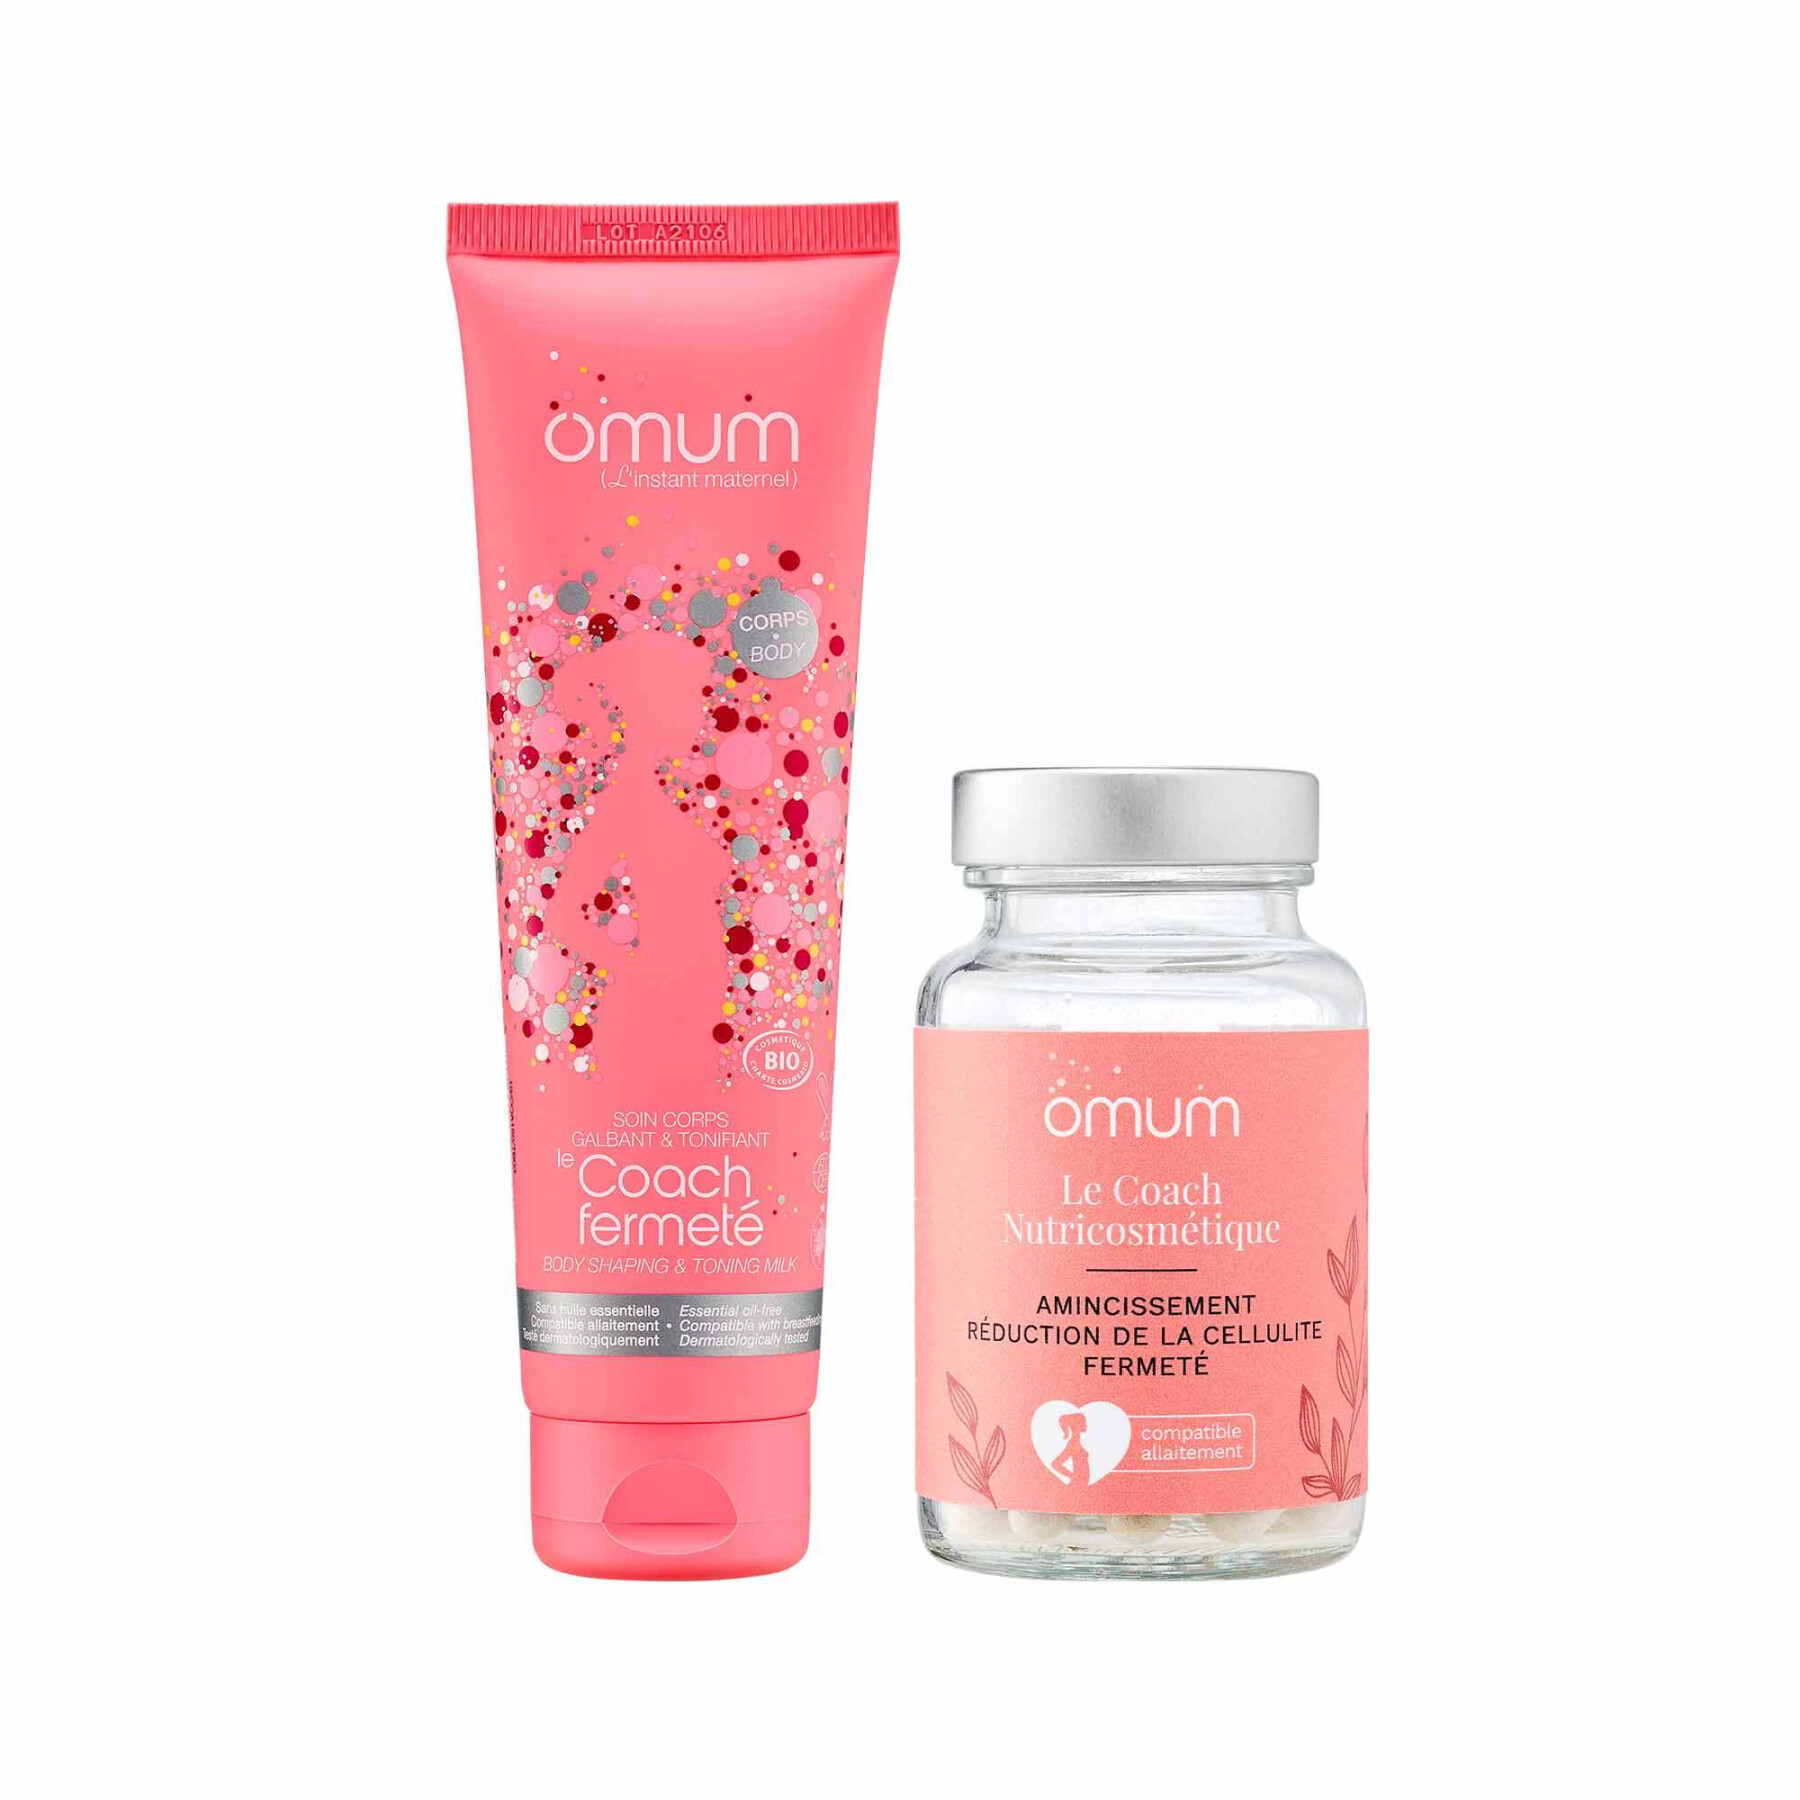 in et out women's slimming and firming care set - duo shaping and toning care + slimming, cellulite and firming food supplement Omum